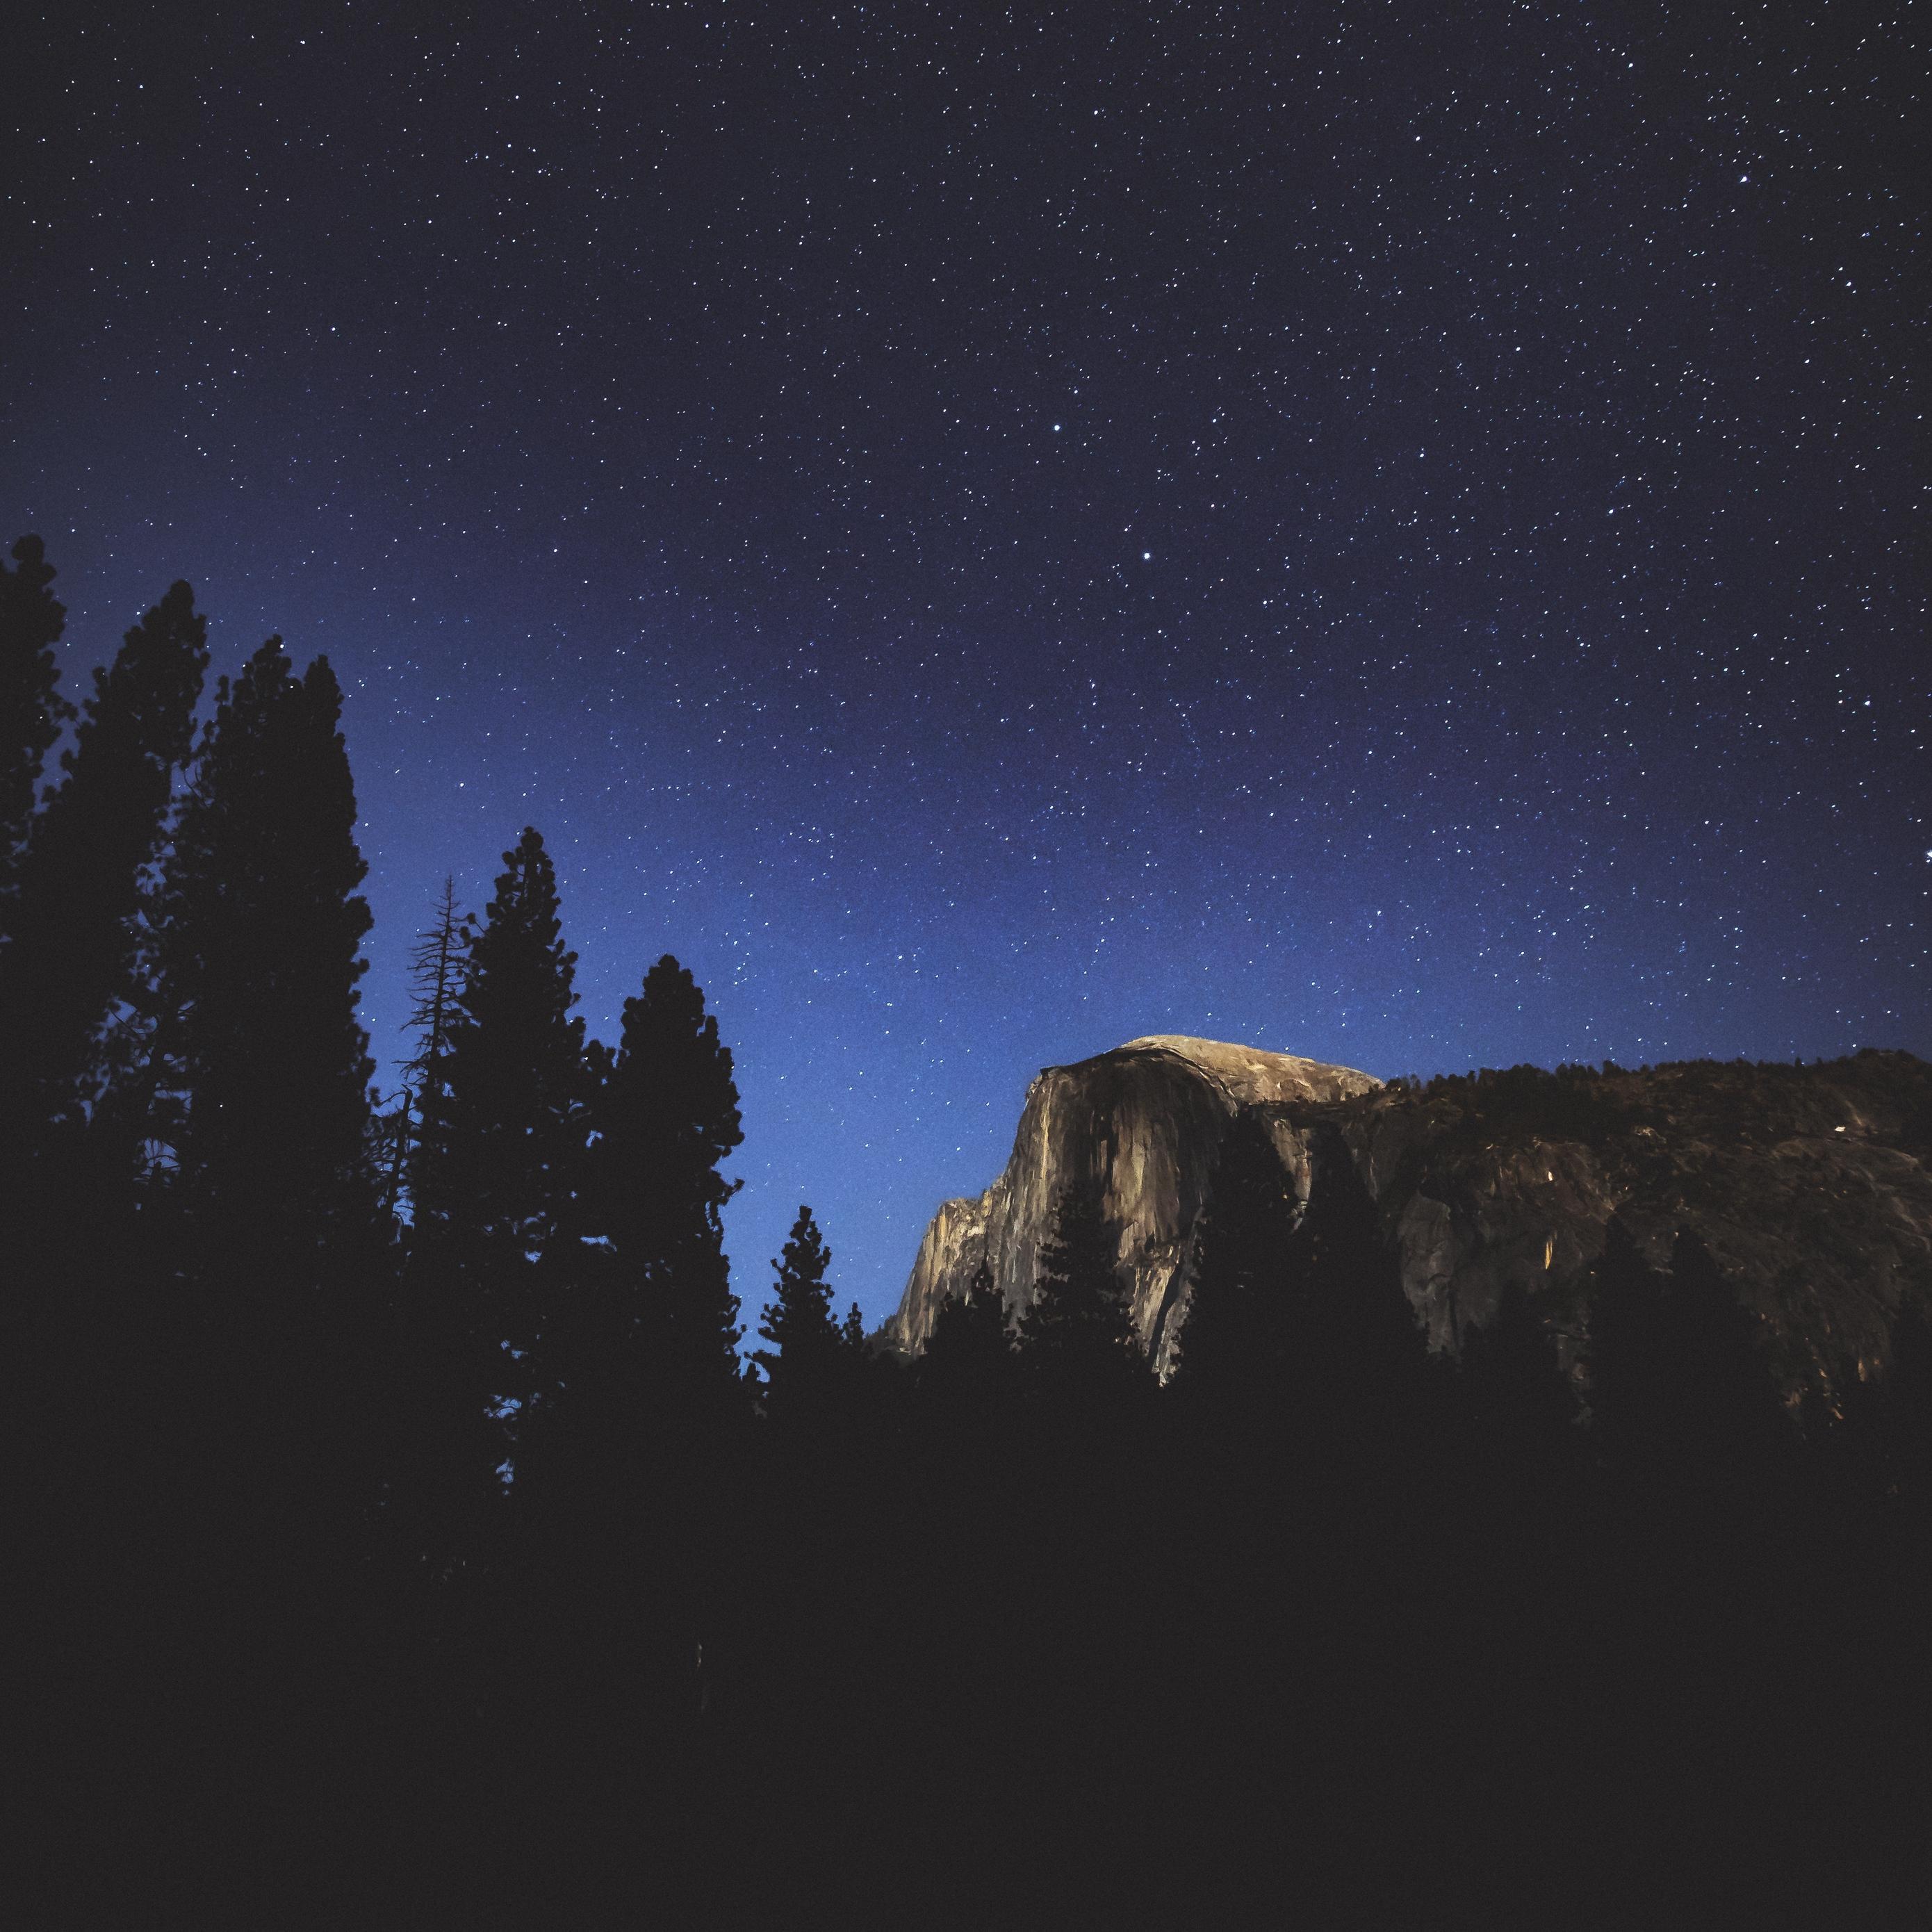 Download wallpaper 2780x2780 night, trees, mountains, stars, forest